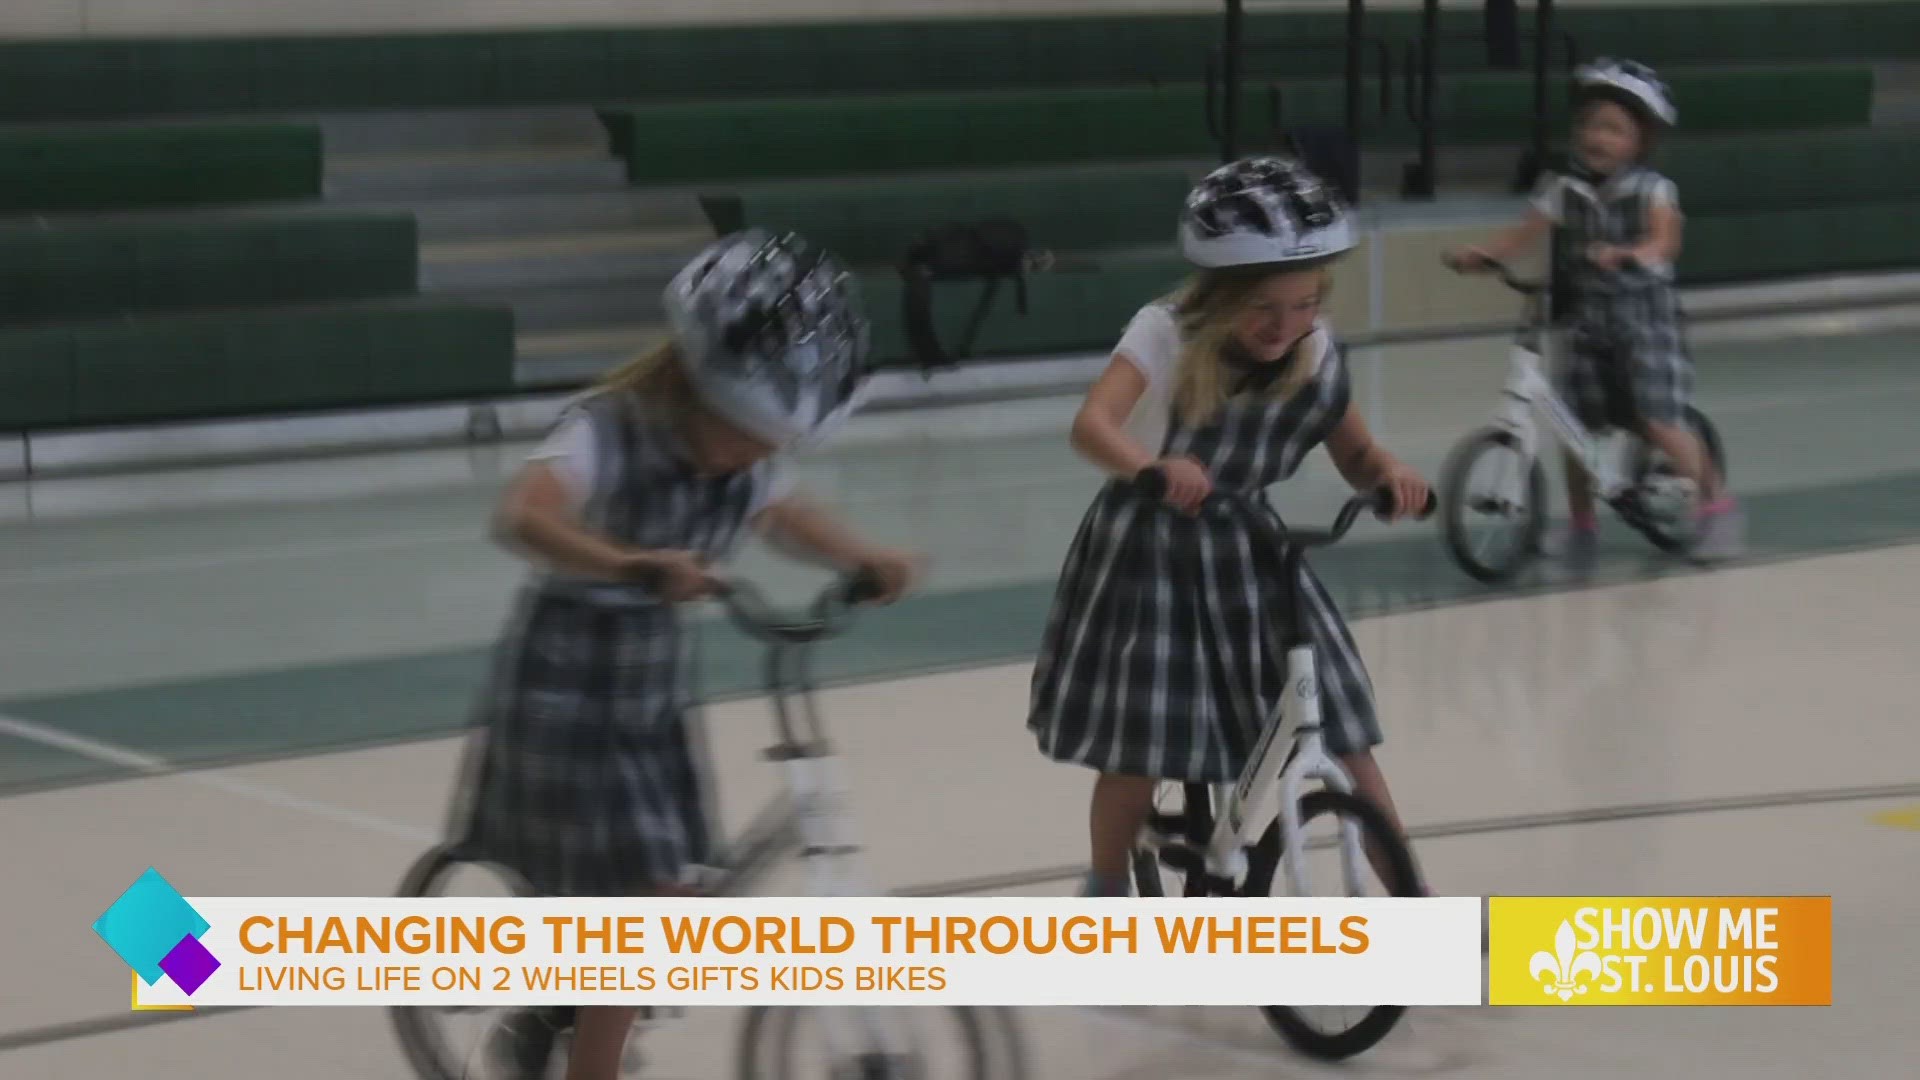 One local nonprofit gifts kids bikes to promote mental and physical health in schools